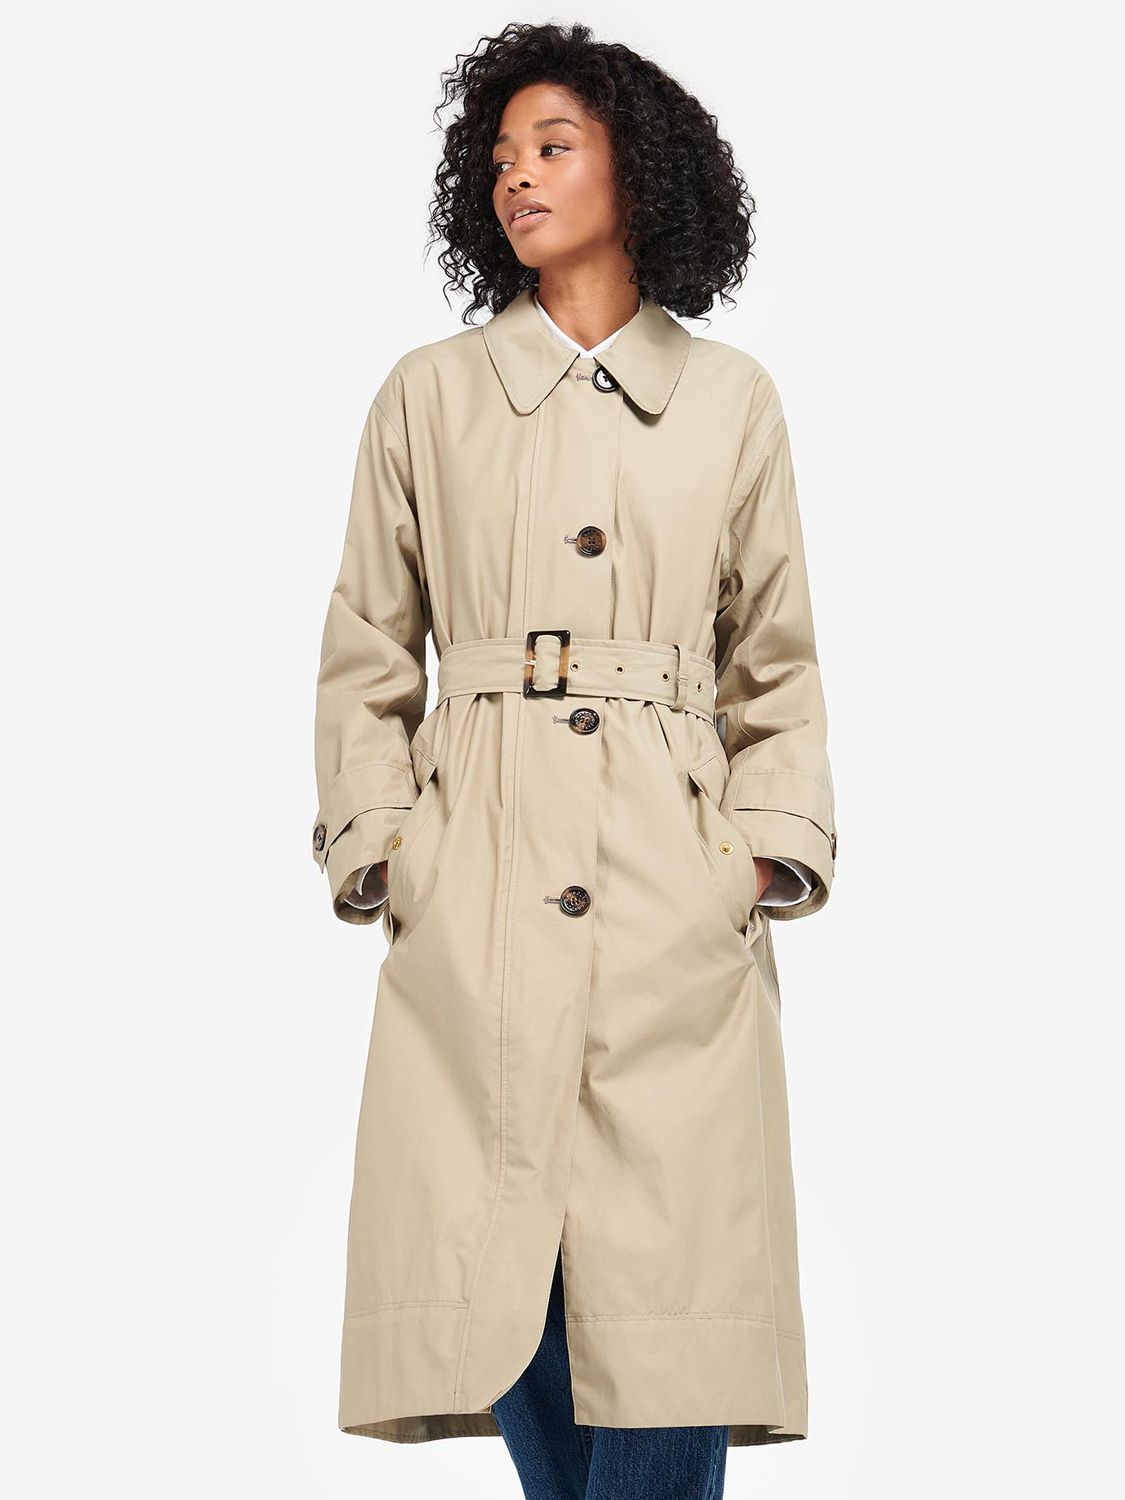 Barbour Somerland Trench Coat, Poplar Green/Ancient at John Lewis ...